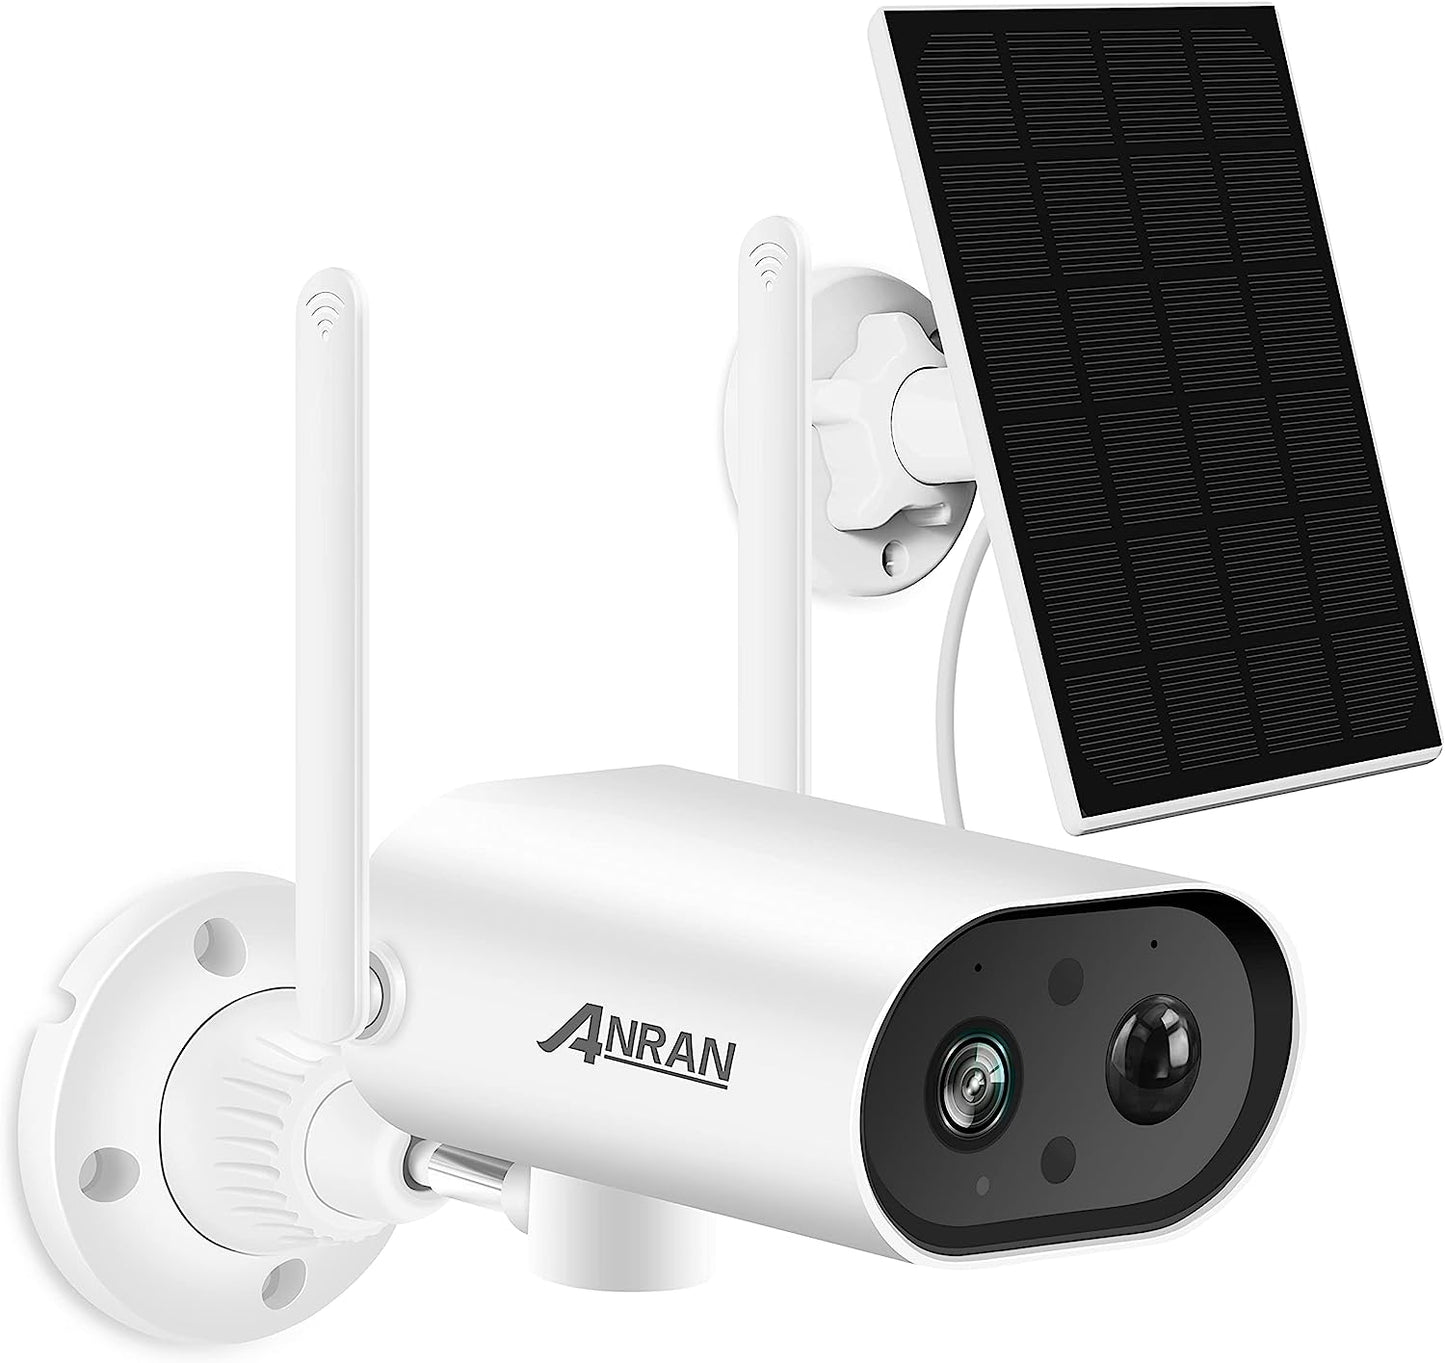 ANRAN Security Cameras Wireless Outdoor with PR 180°, 2K Solar Security Camera Outdoor with Solar Panel, PIR Human Detection, 2-Way Talk, Night Vision, IP65 Waterproof, Work with Alexa, S02 White